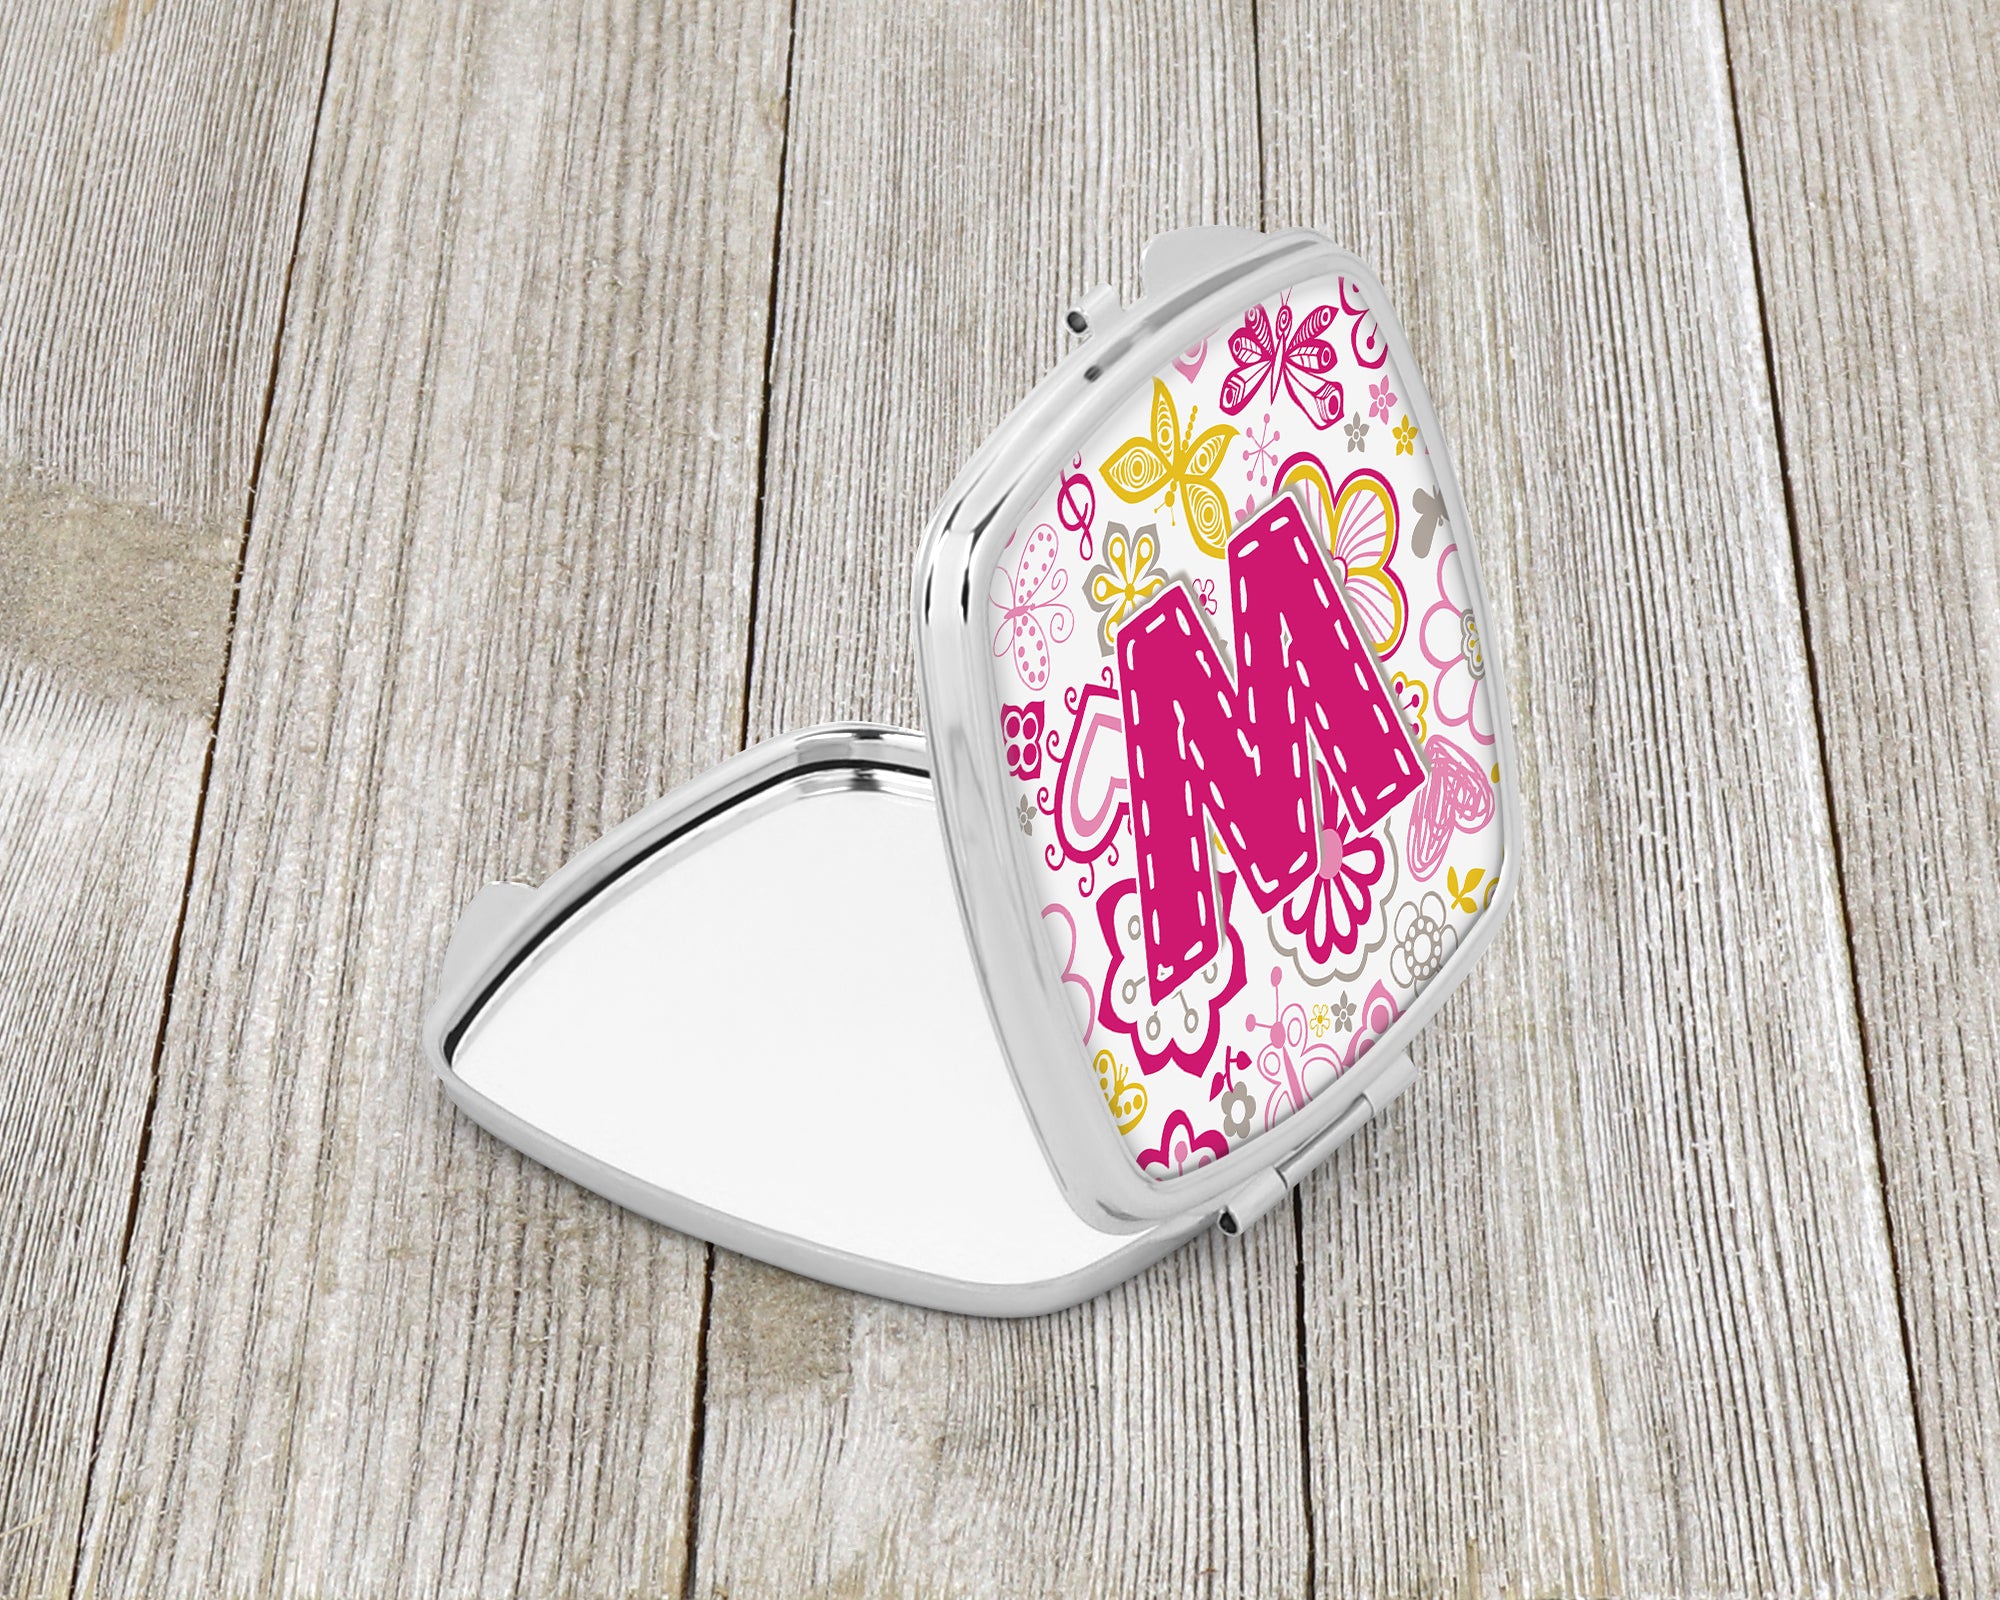 Letter W Flowers and Butterflies Pink Compact Mirror CJ2005-WSCM